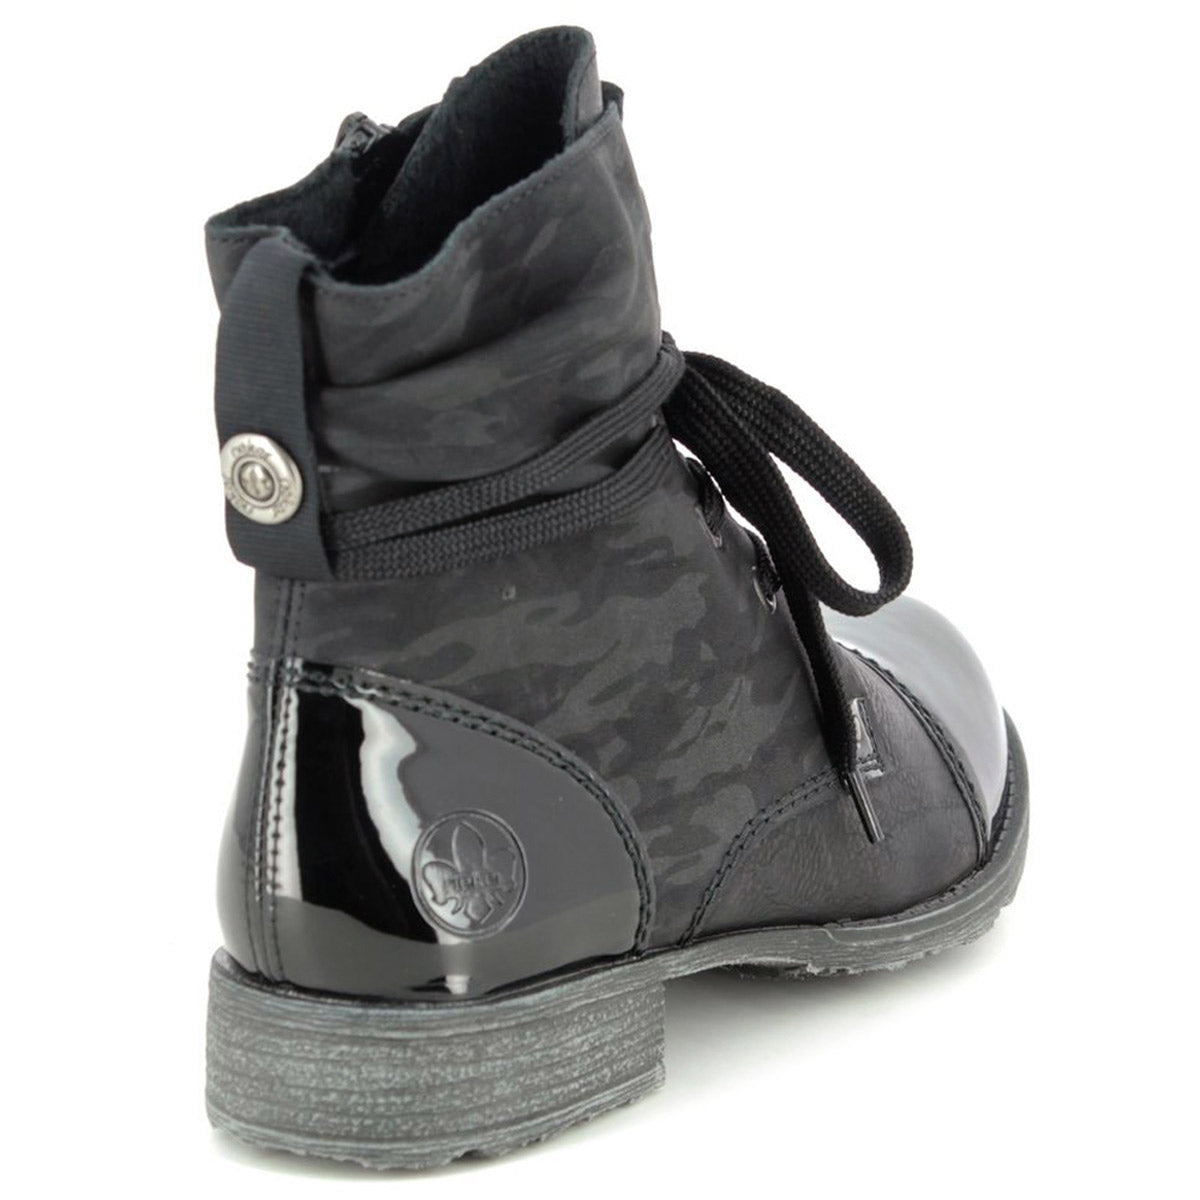 A black camo print toddler boot with camouflage pattern and side zipper - Rieker Lace Up Bootie Black Camo Print.